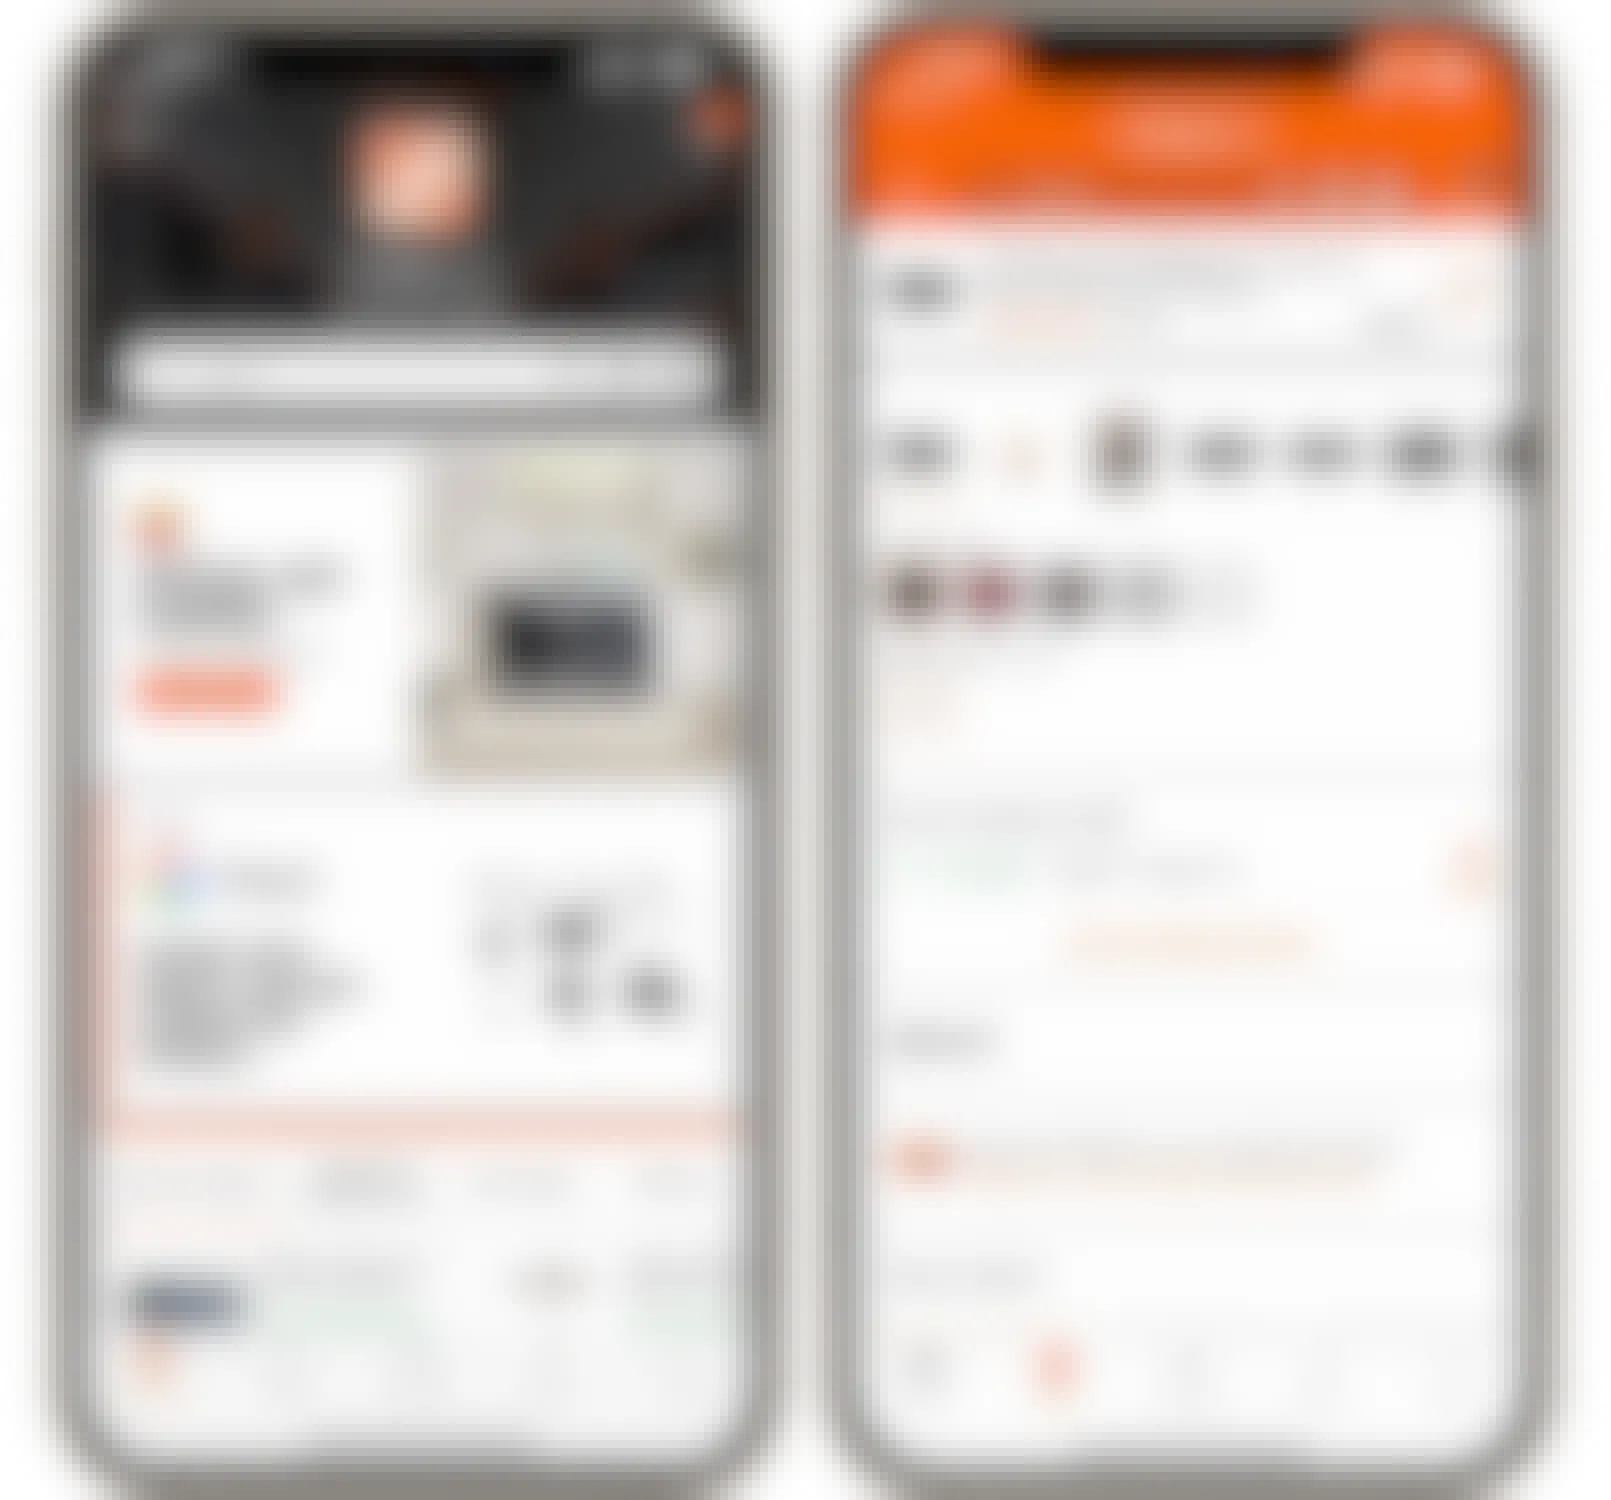 A graphic of two cell phones showing the Home Depot app and where it shows a product's location in a store.